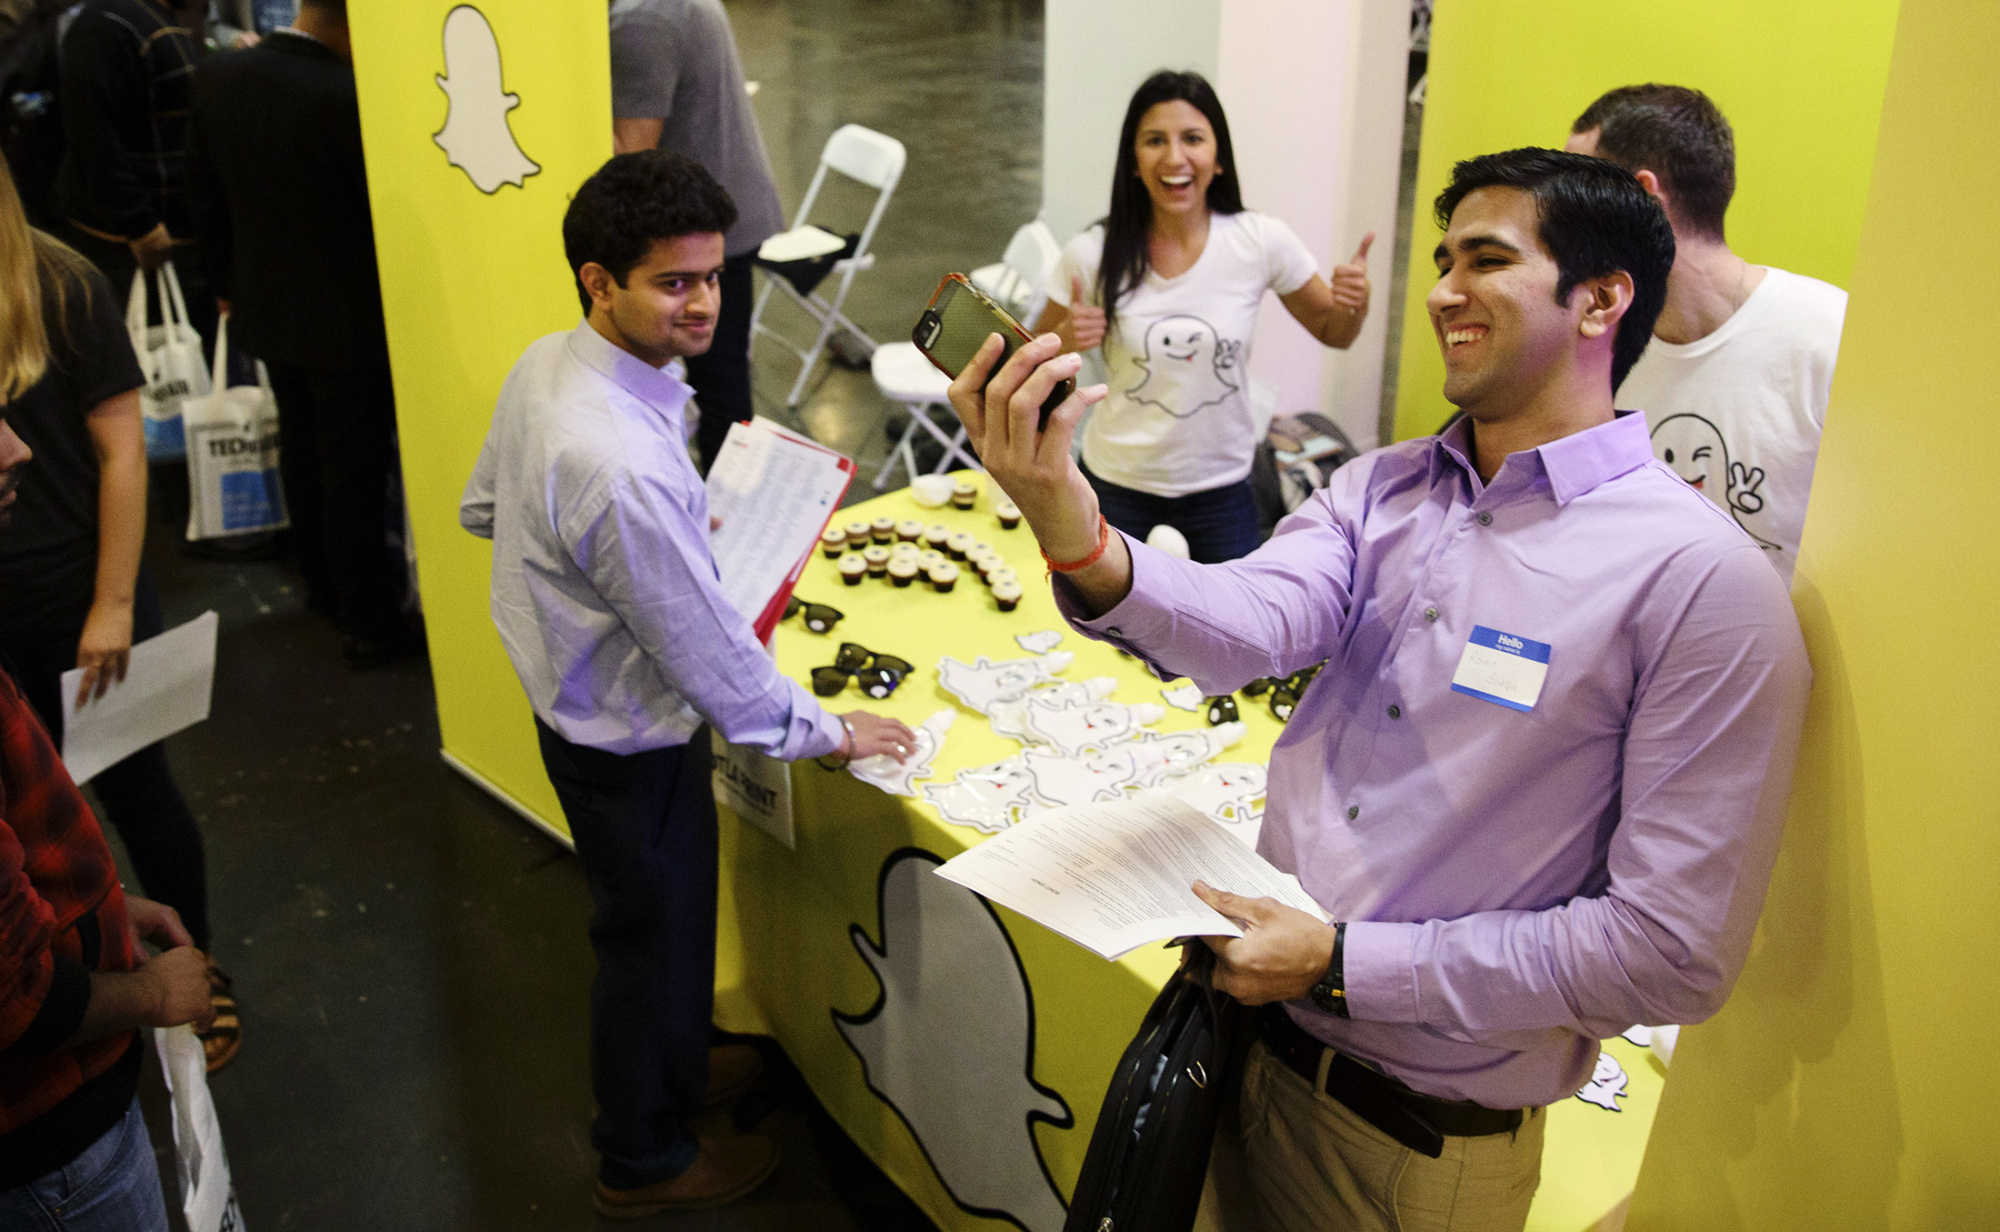 A job seeker takes a Snapchat photo with Snap Inc. representatives during the TechFair LA job fair in Los Angeles on Jan. 26.
